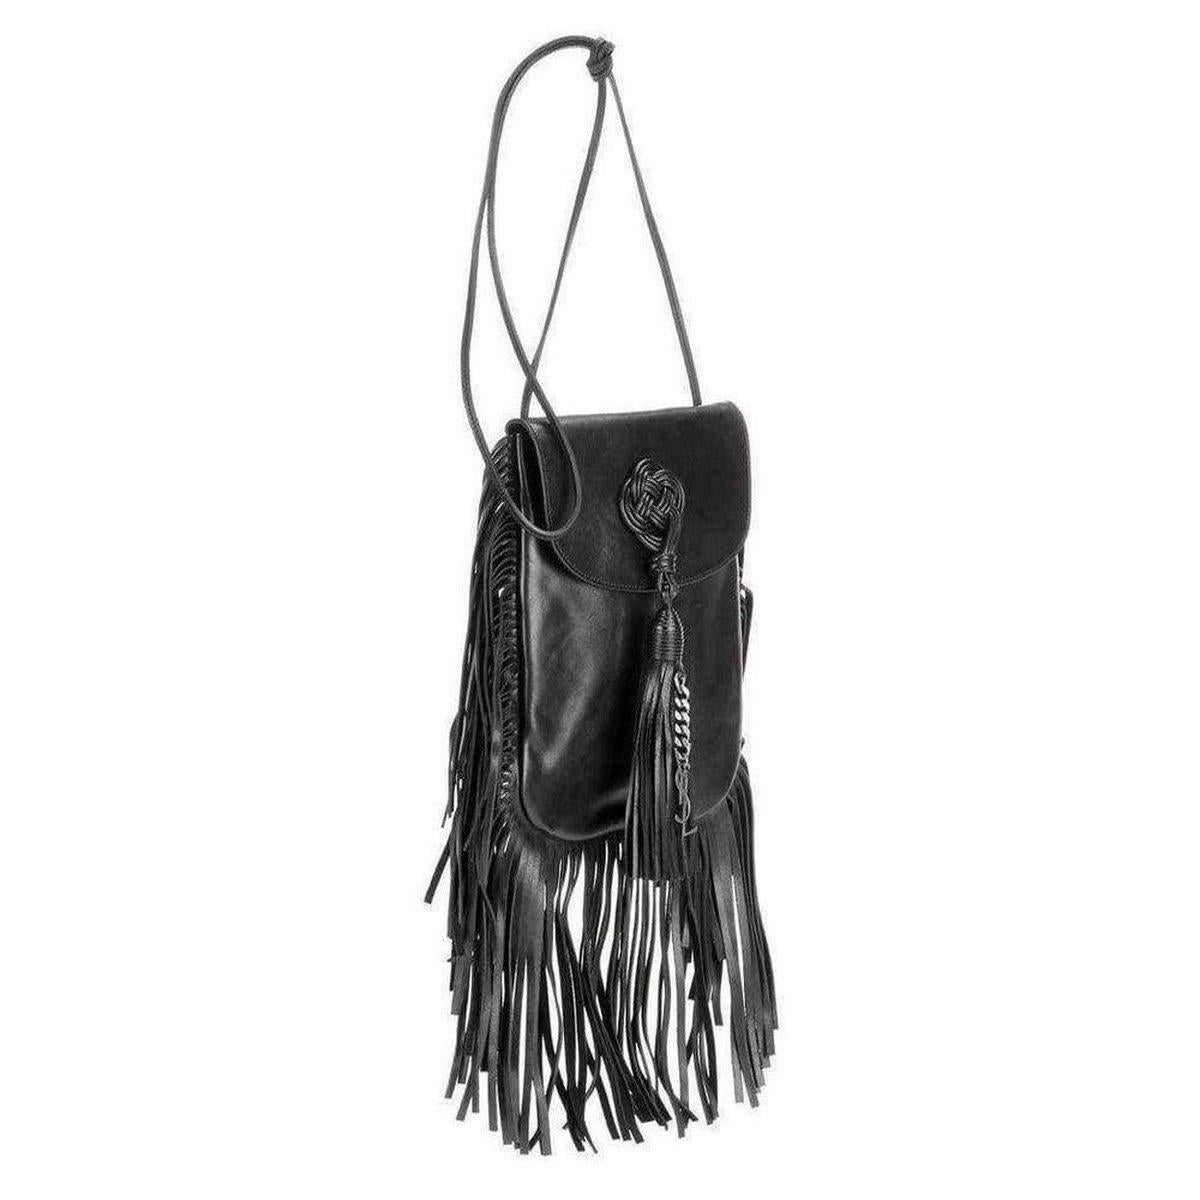 Saint Laurent Anita Fringe Leather Crossbody Bag In New Condition For Sale In Brossard, QC